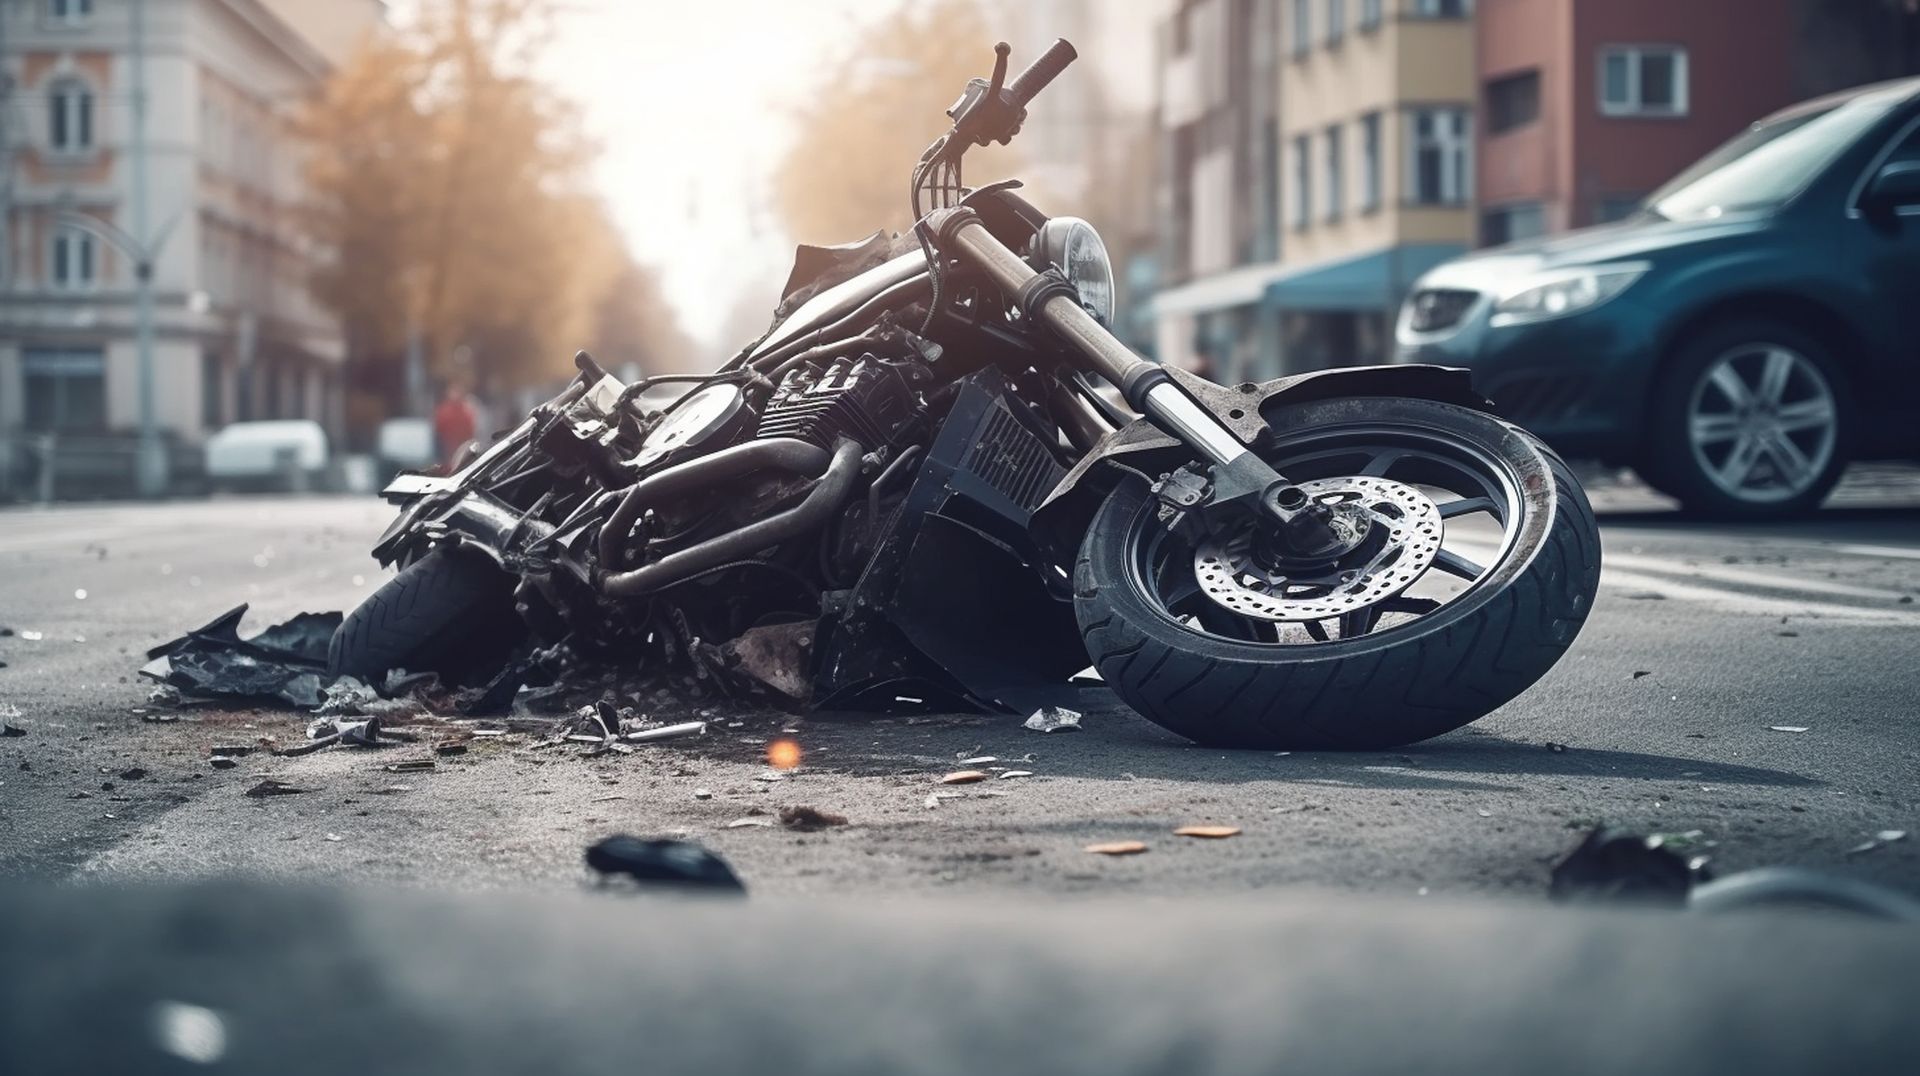 Destroyed Motorcycle after a Road Accident